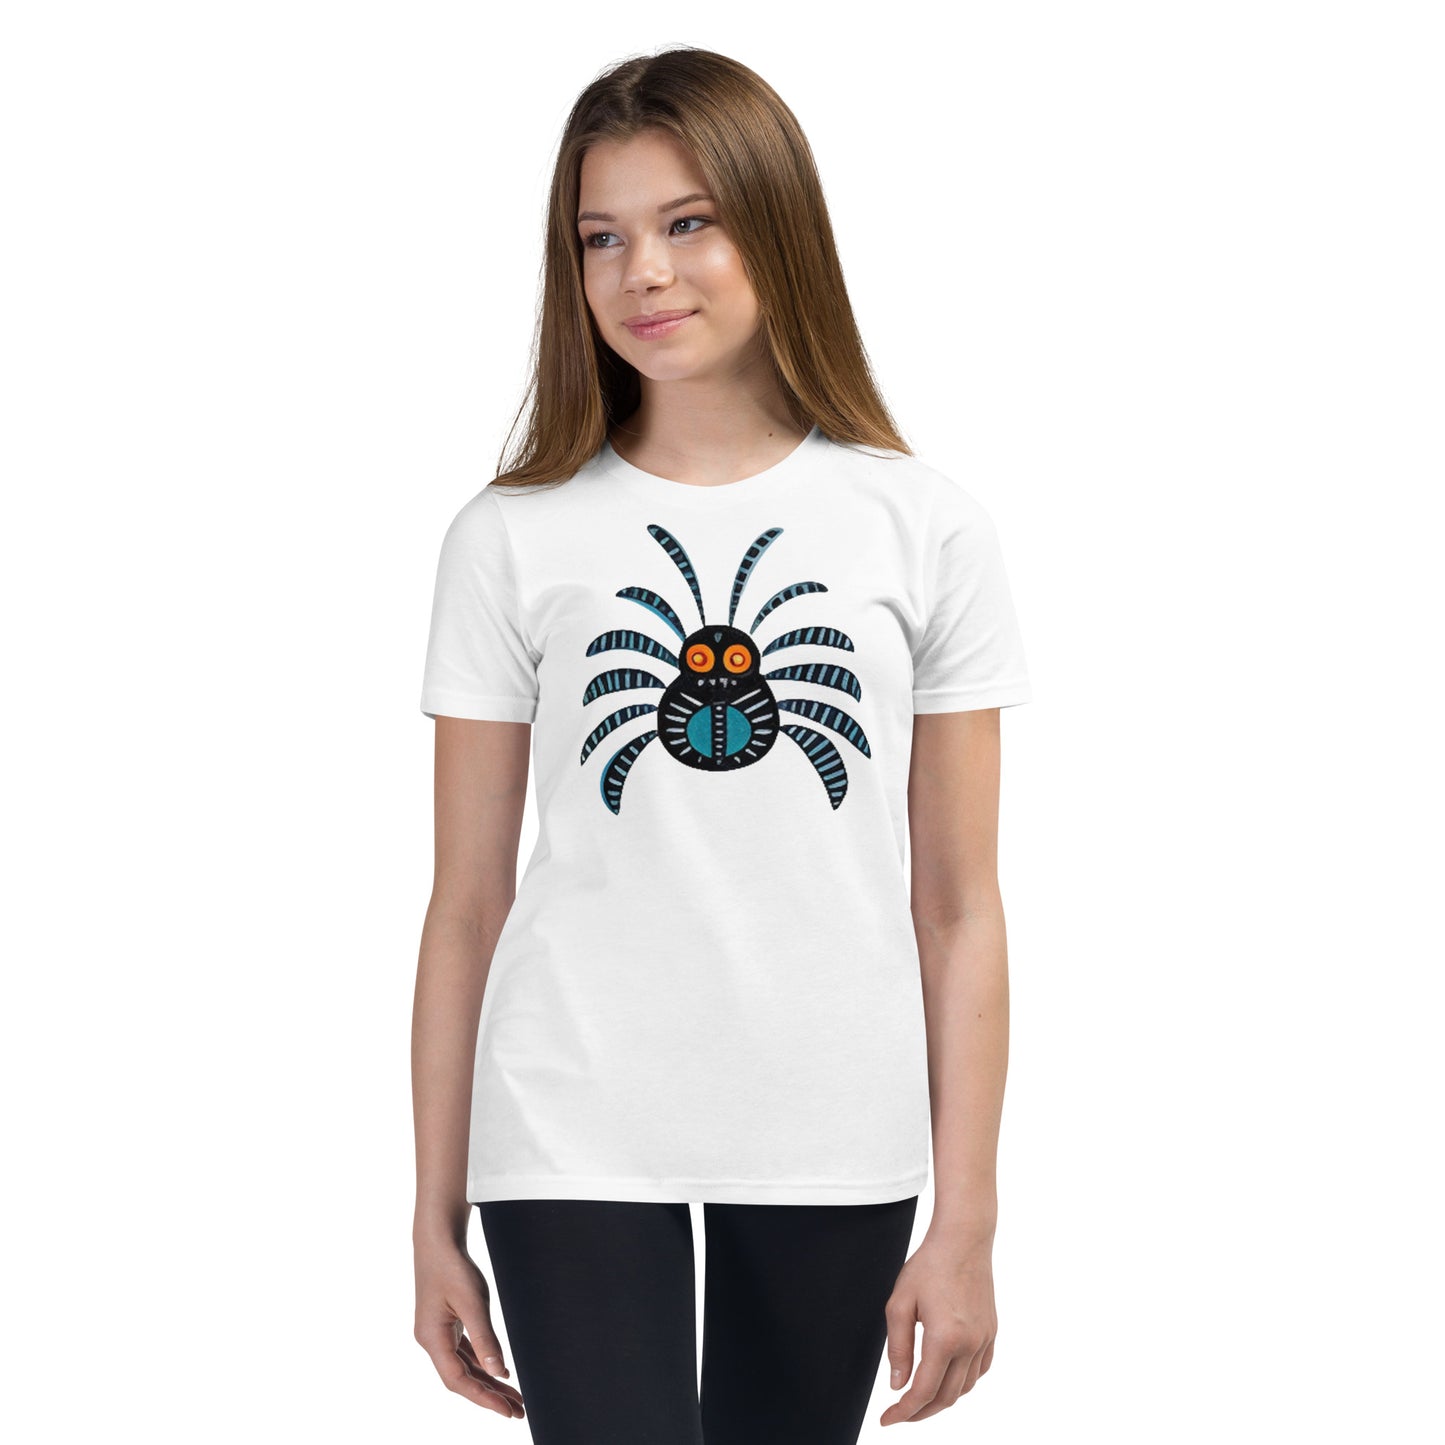 Striped Spider Critter #02 Youth Short Sleeve T-Shirt